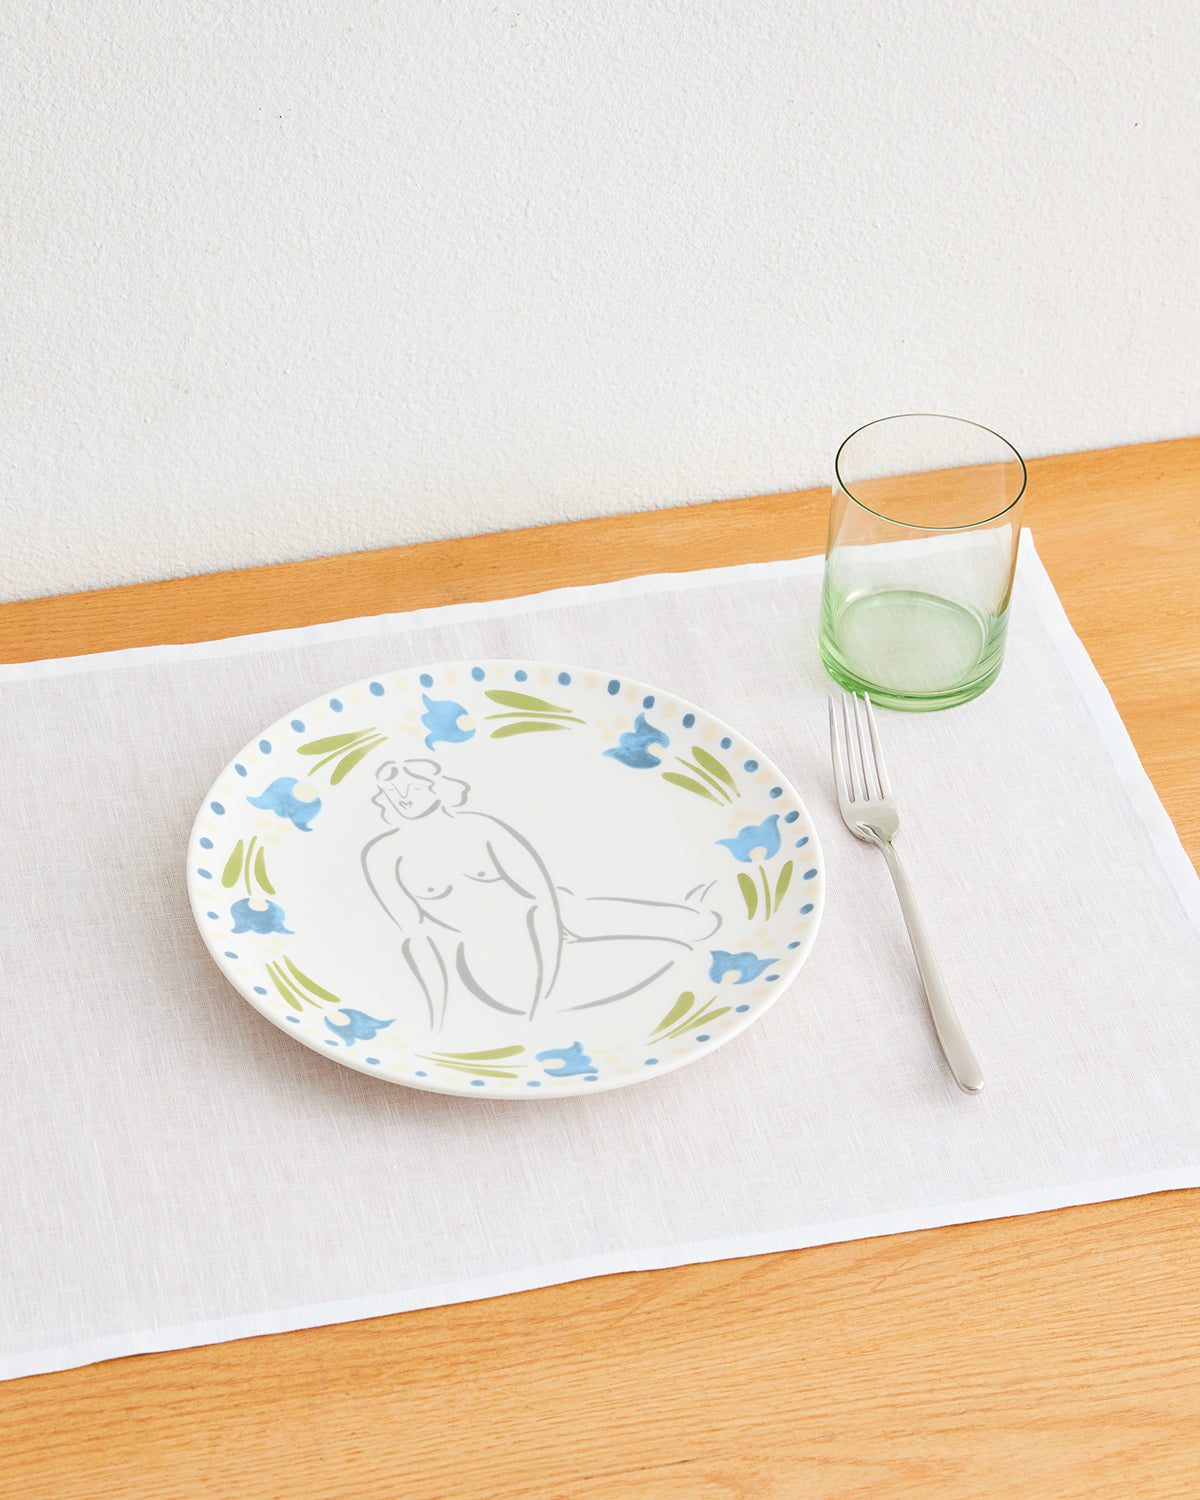 Liv & Dom x Bed Threads 'Fanciful Tulip' Ceramic Dinner Plate